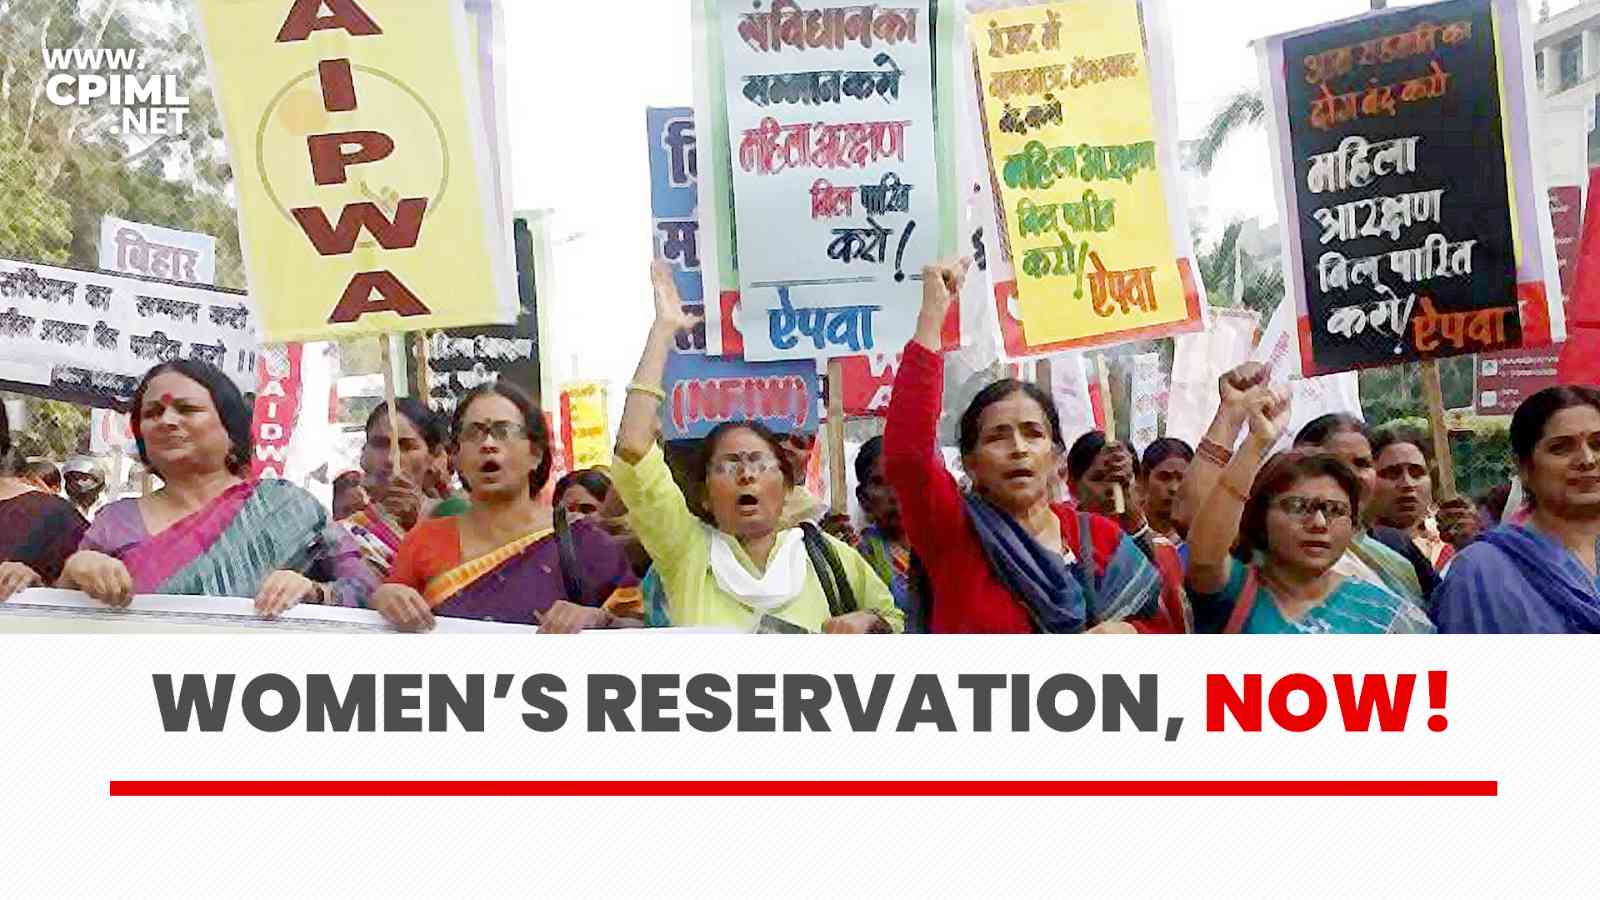 Implementing Women’s Reservation Immediately